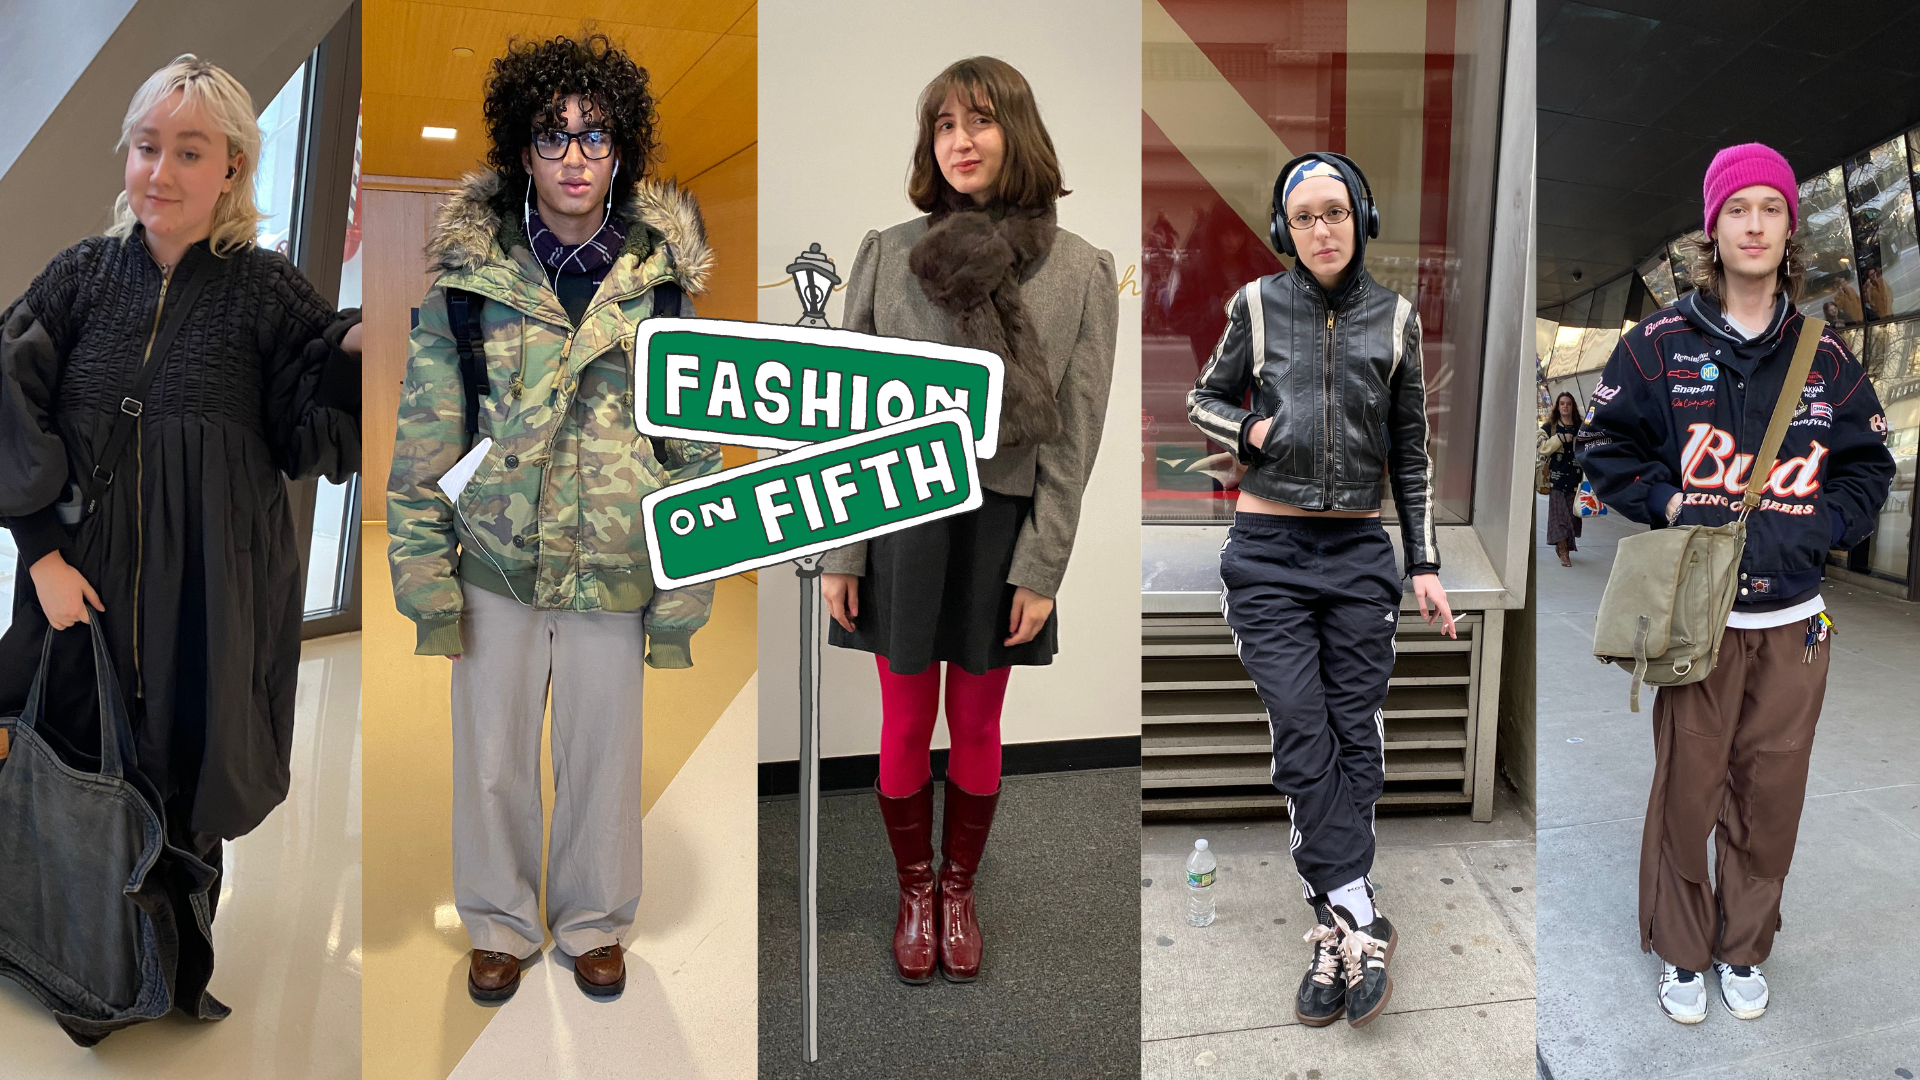 A collage of five New School students side by side with an illustration of a street sign that says “Fashion on Fifth.”